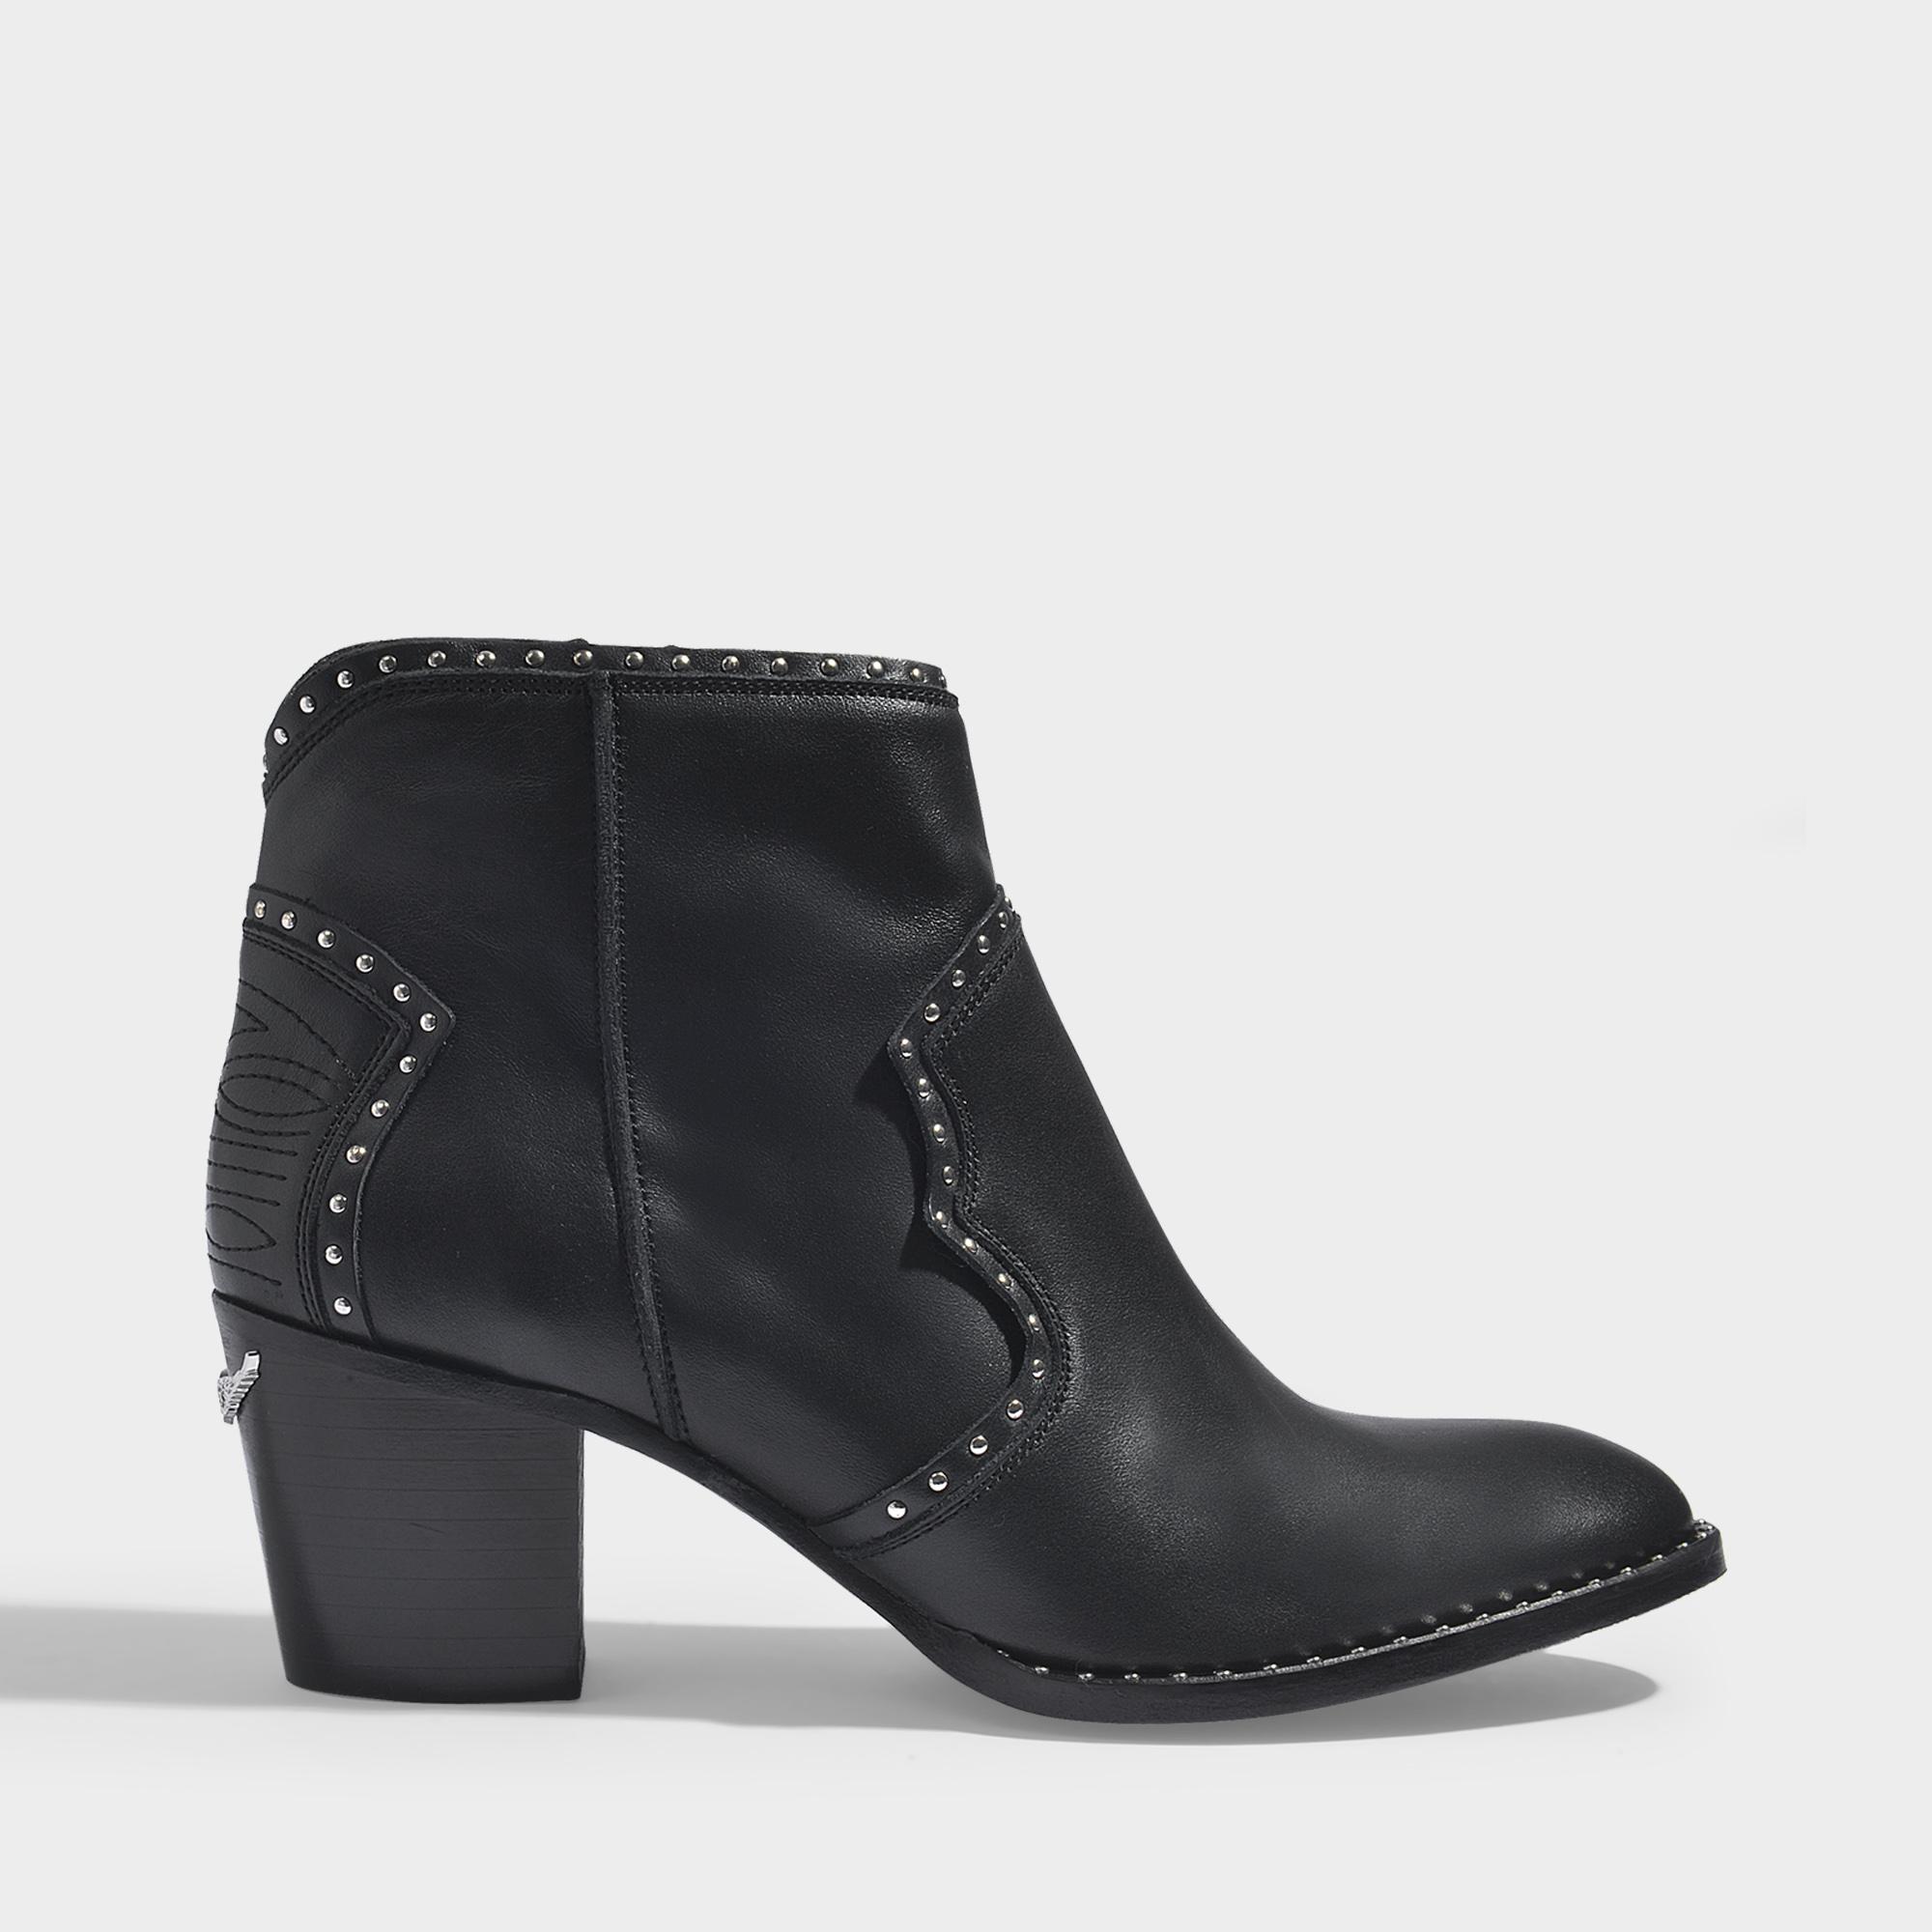 Zadig & Voltaire Molly Studded Boots in Black | Lyst